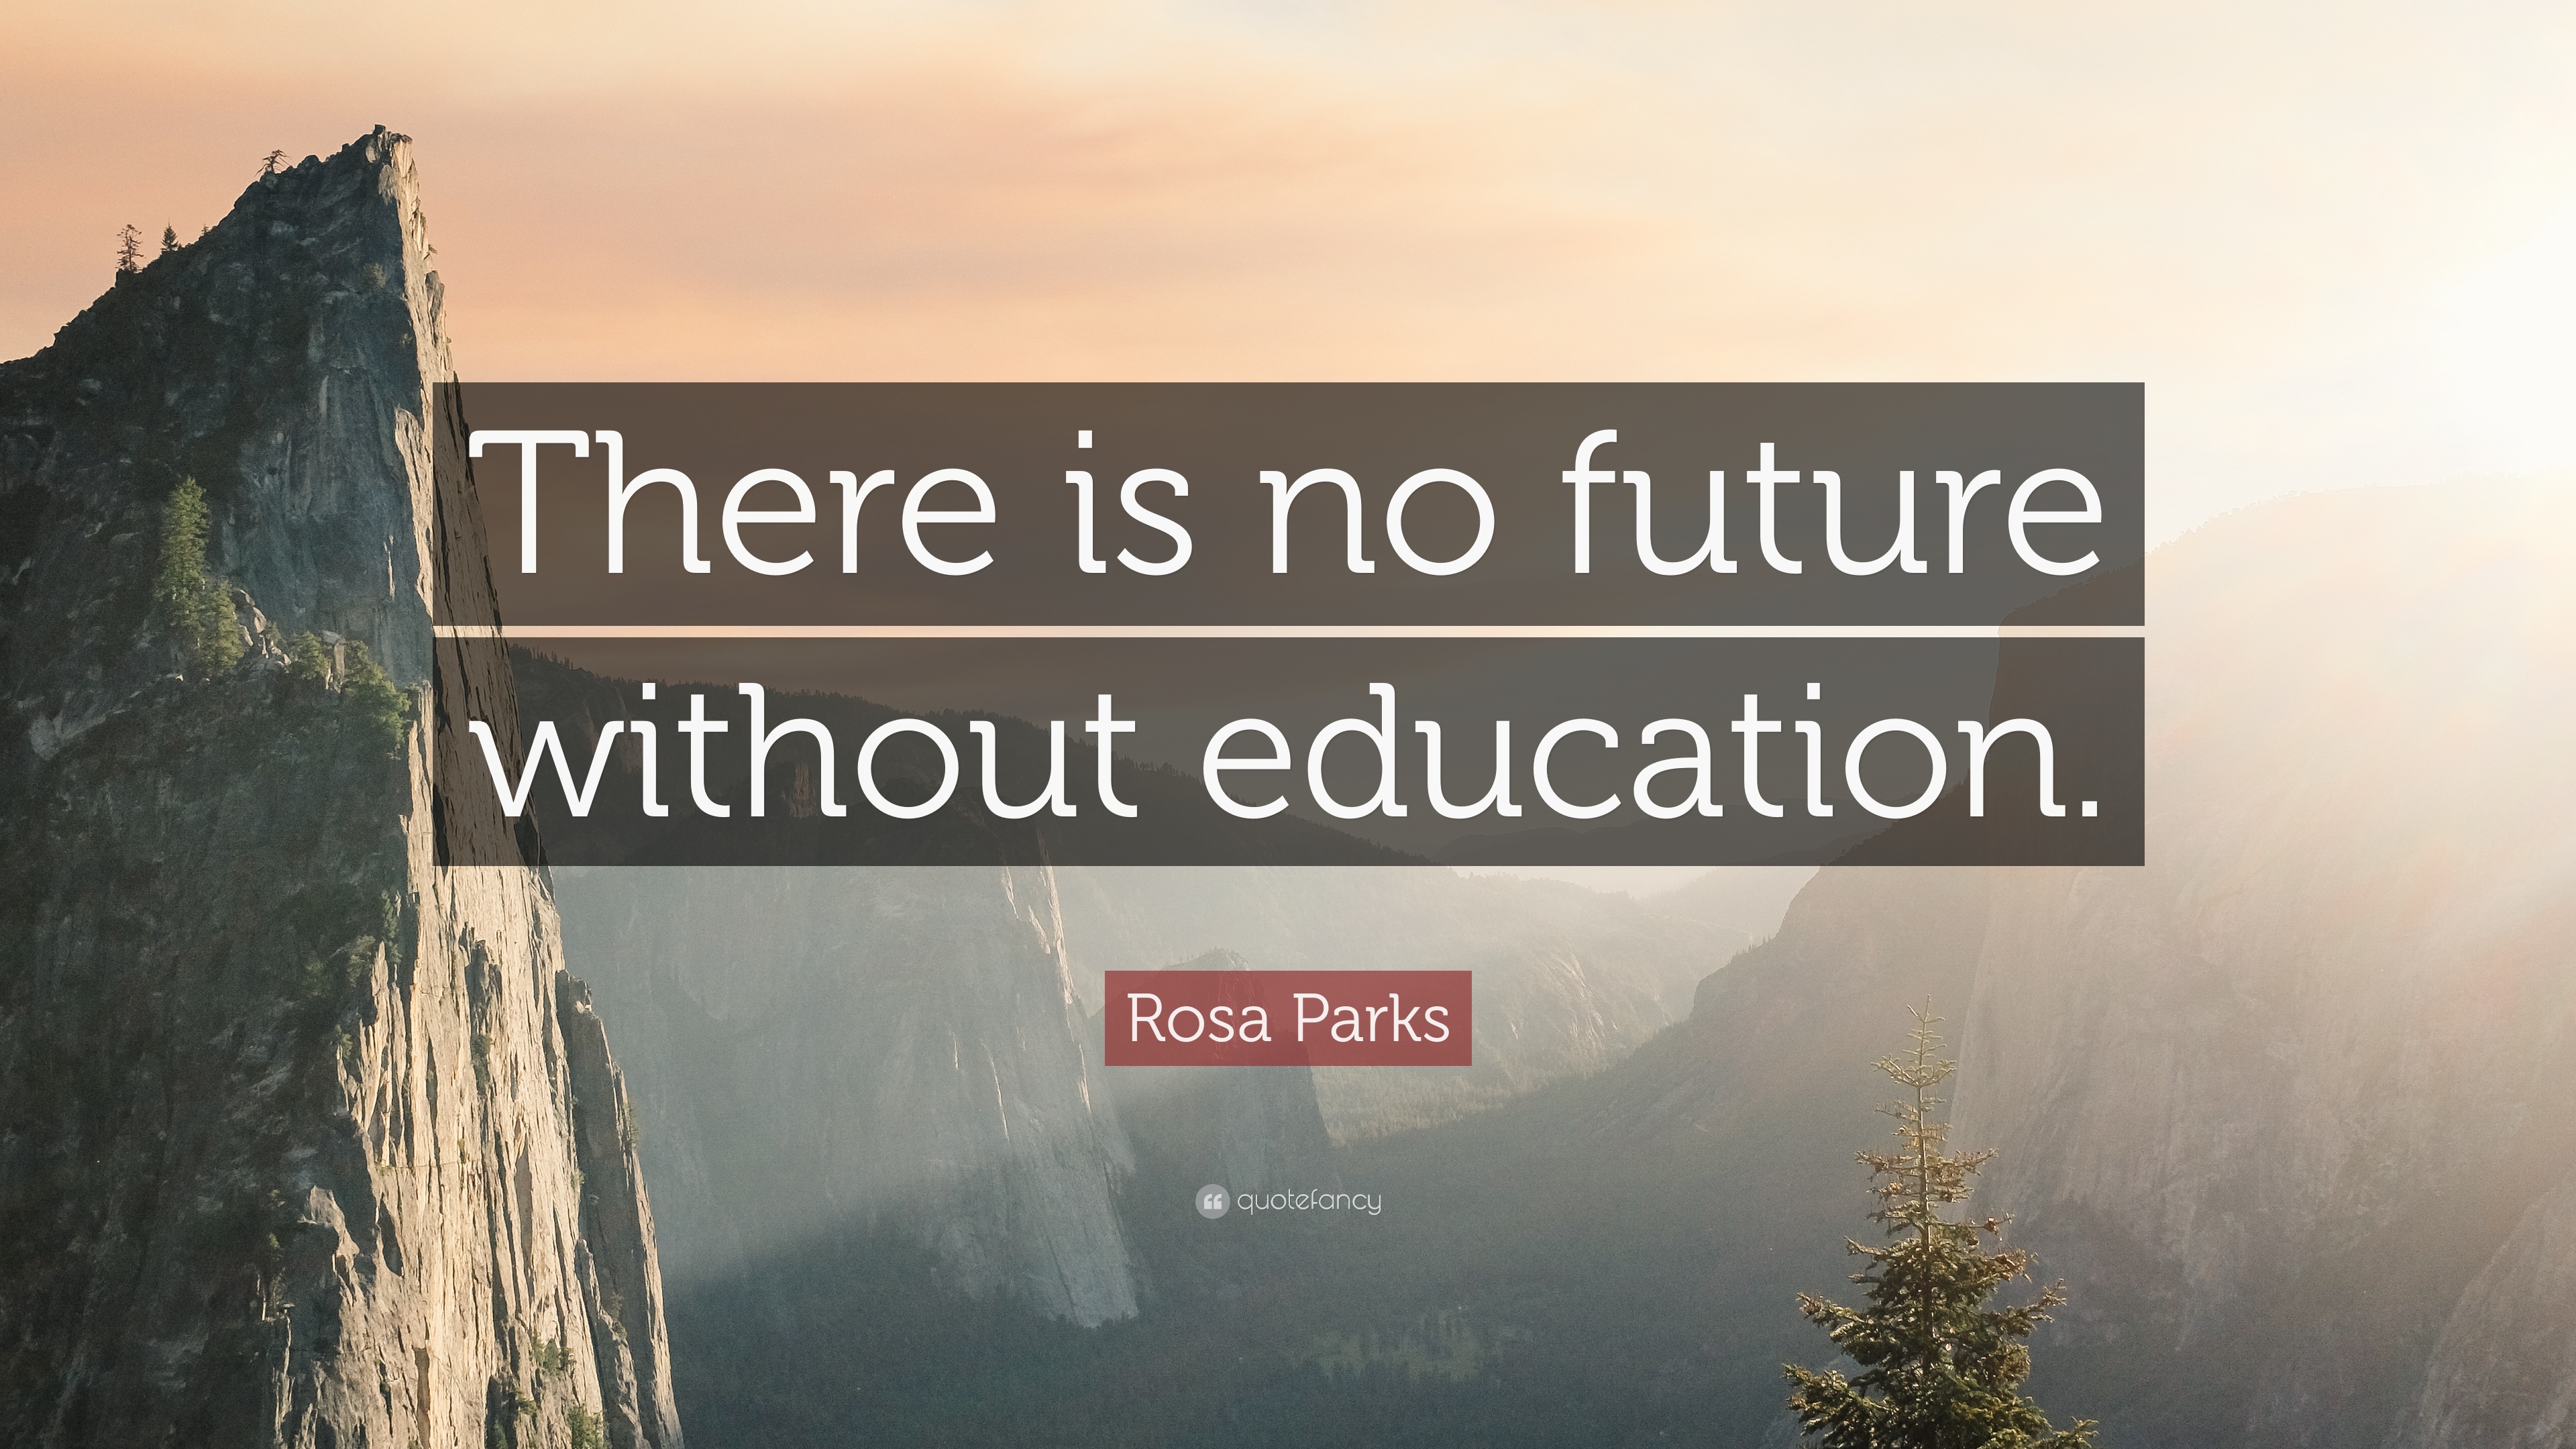 Rosa Parks Quote: “There is no future without education.” 12